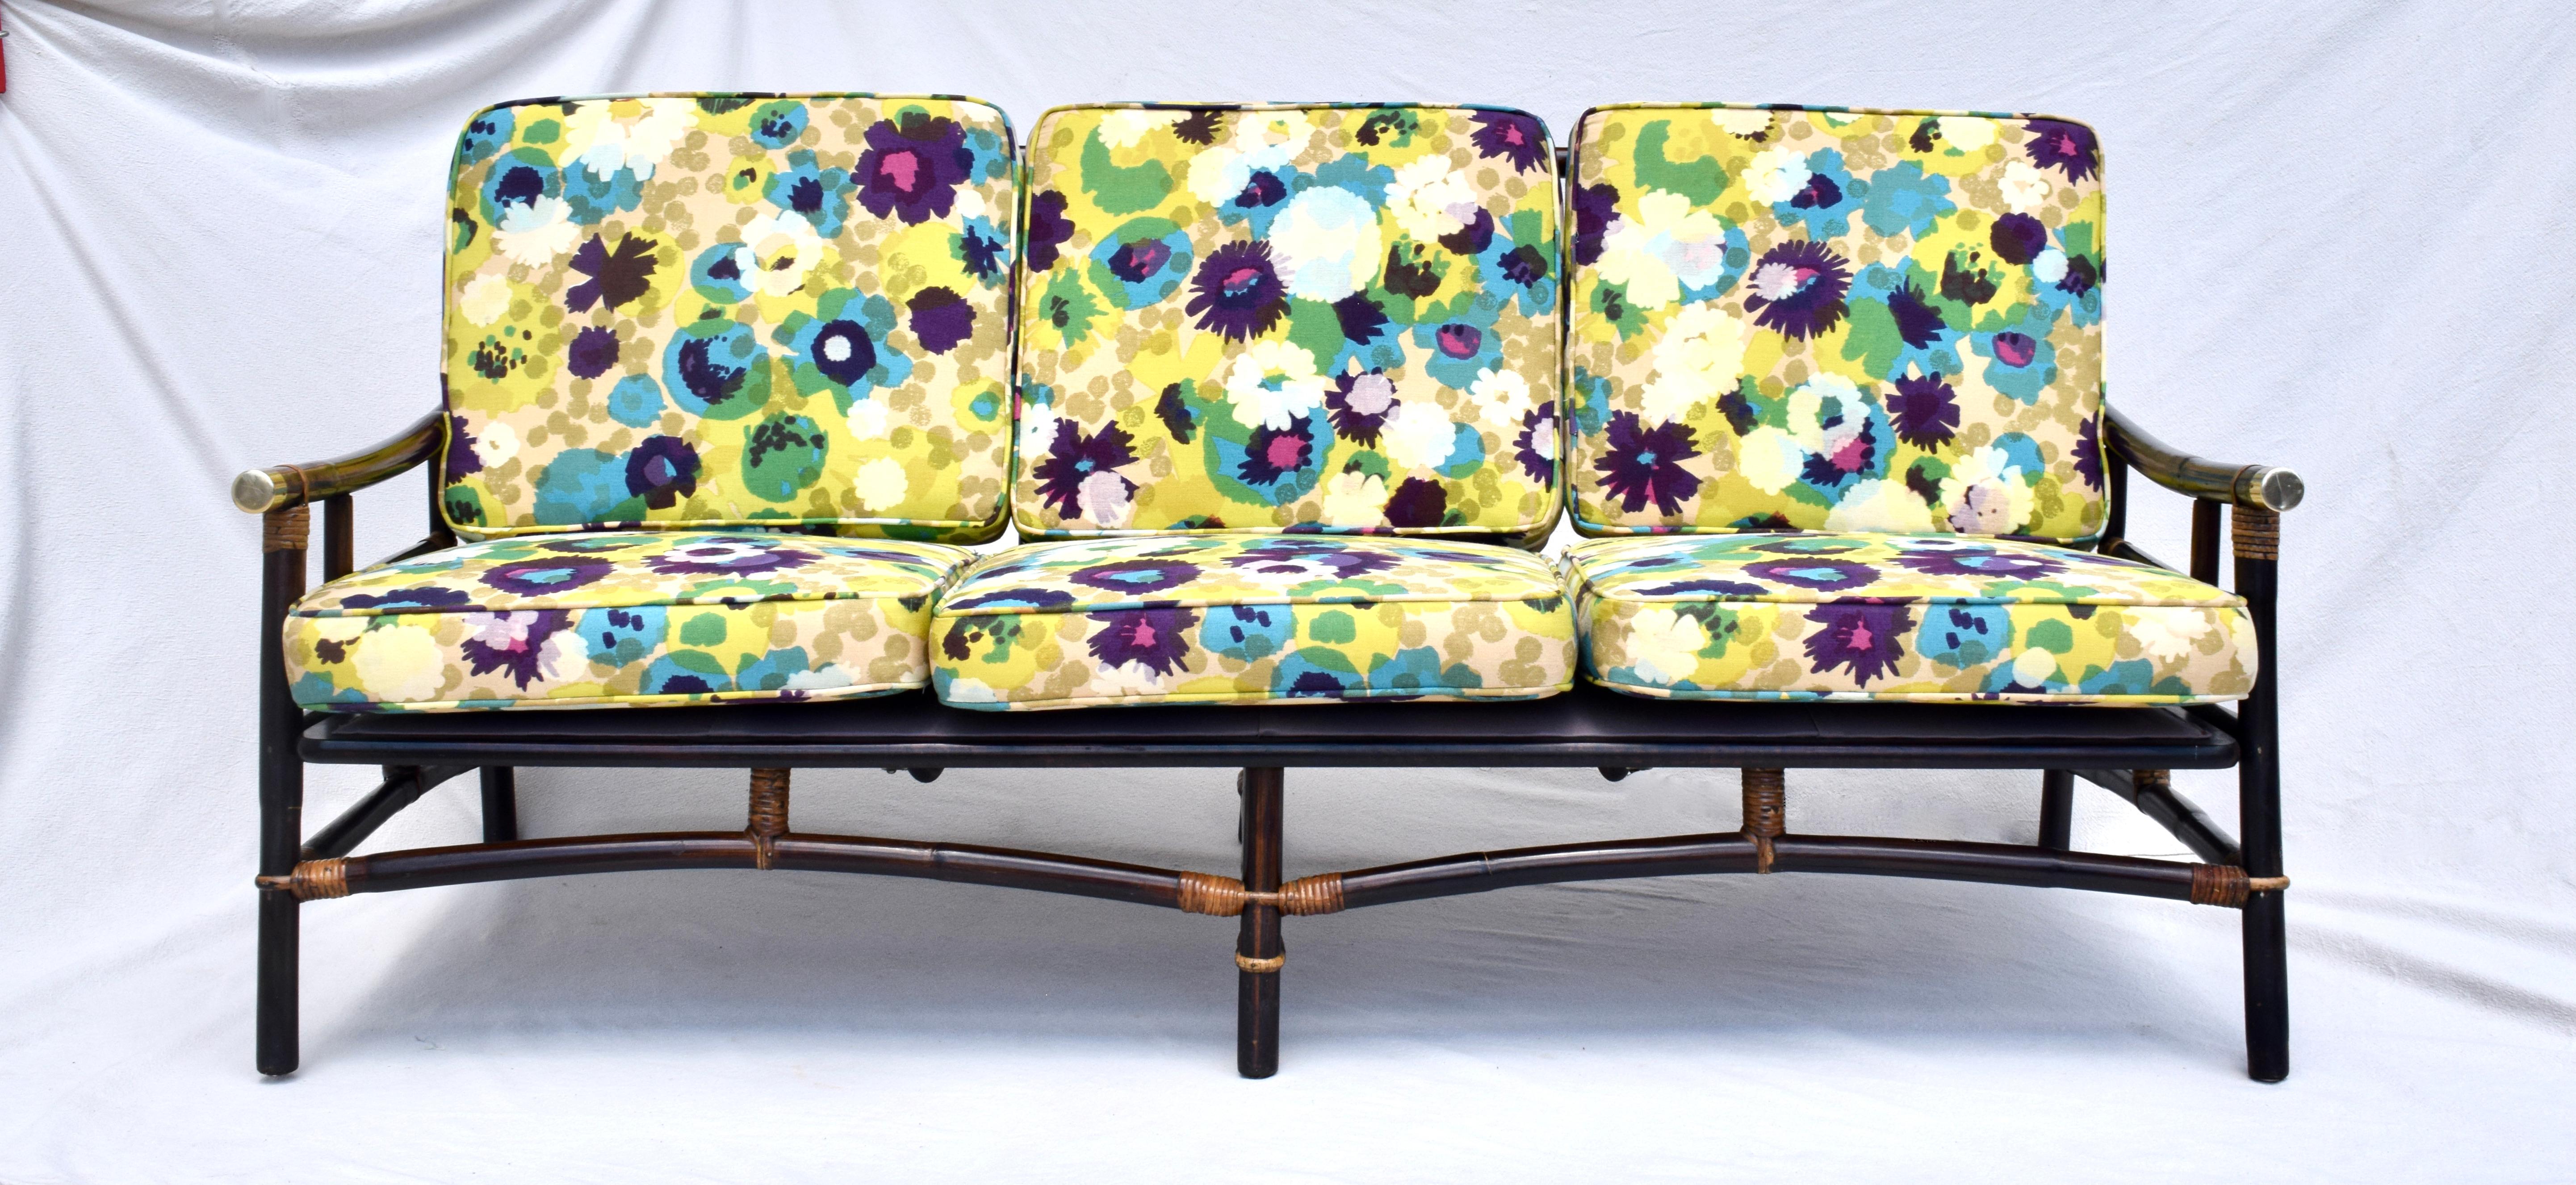 1950's John Wisner Ficks Reed Far Horizons rattan sofa with new wrapped foam inserts to the original custom cushions in vibrant Jack Lenor Larsen floral upholstery.  In overall exceptional condition, the beautifully maintained cushions have always